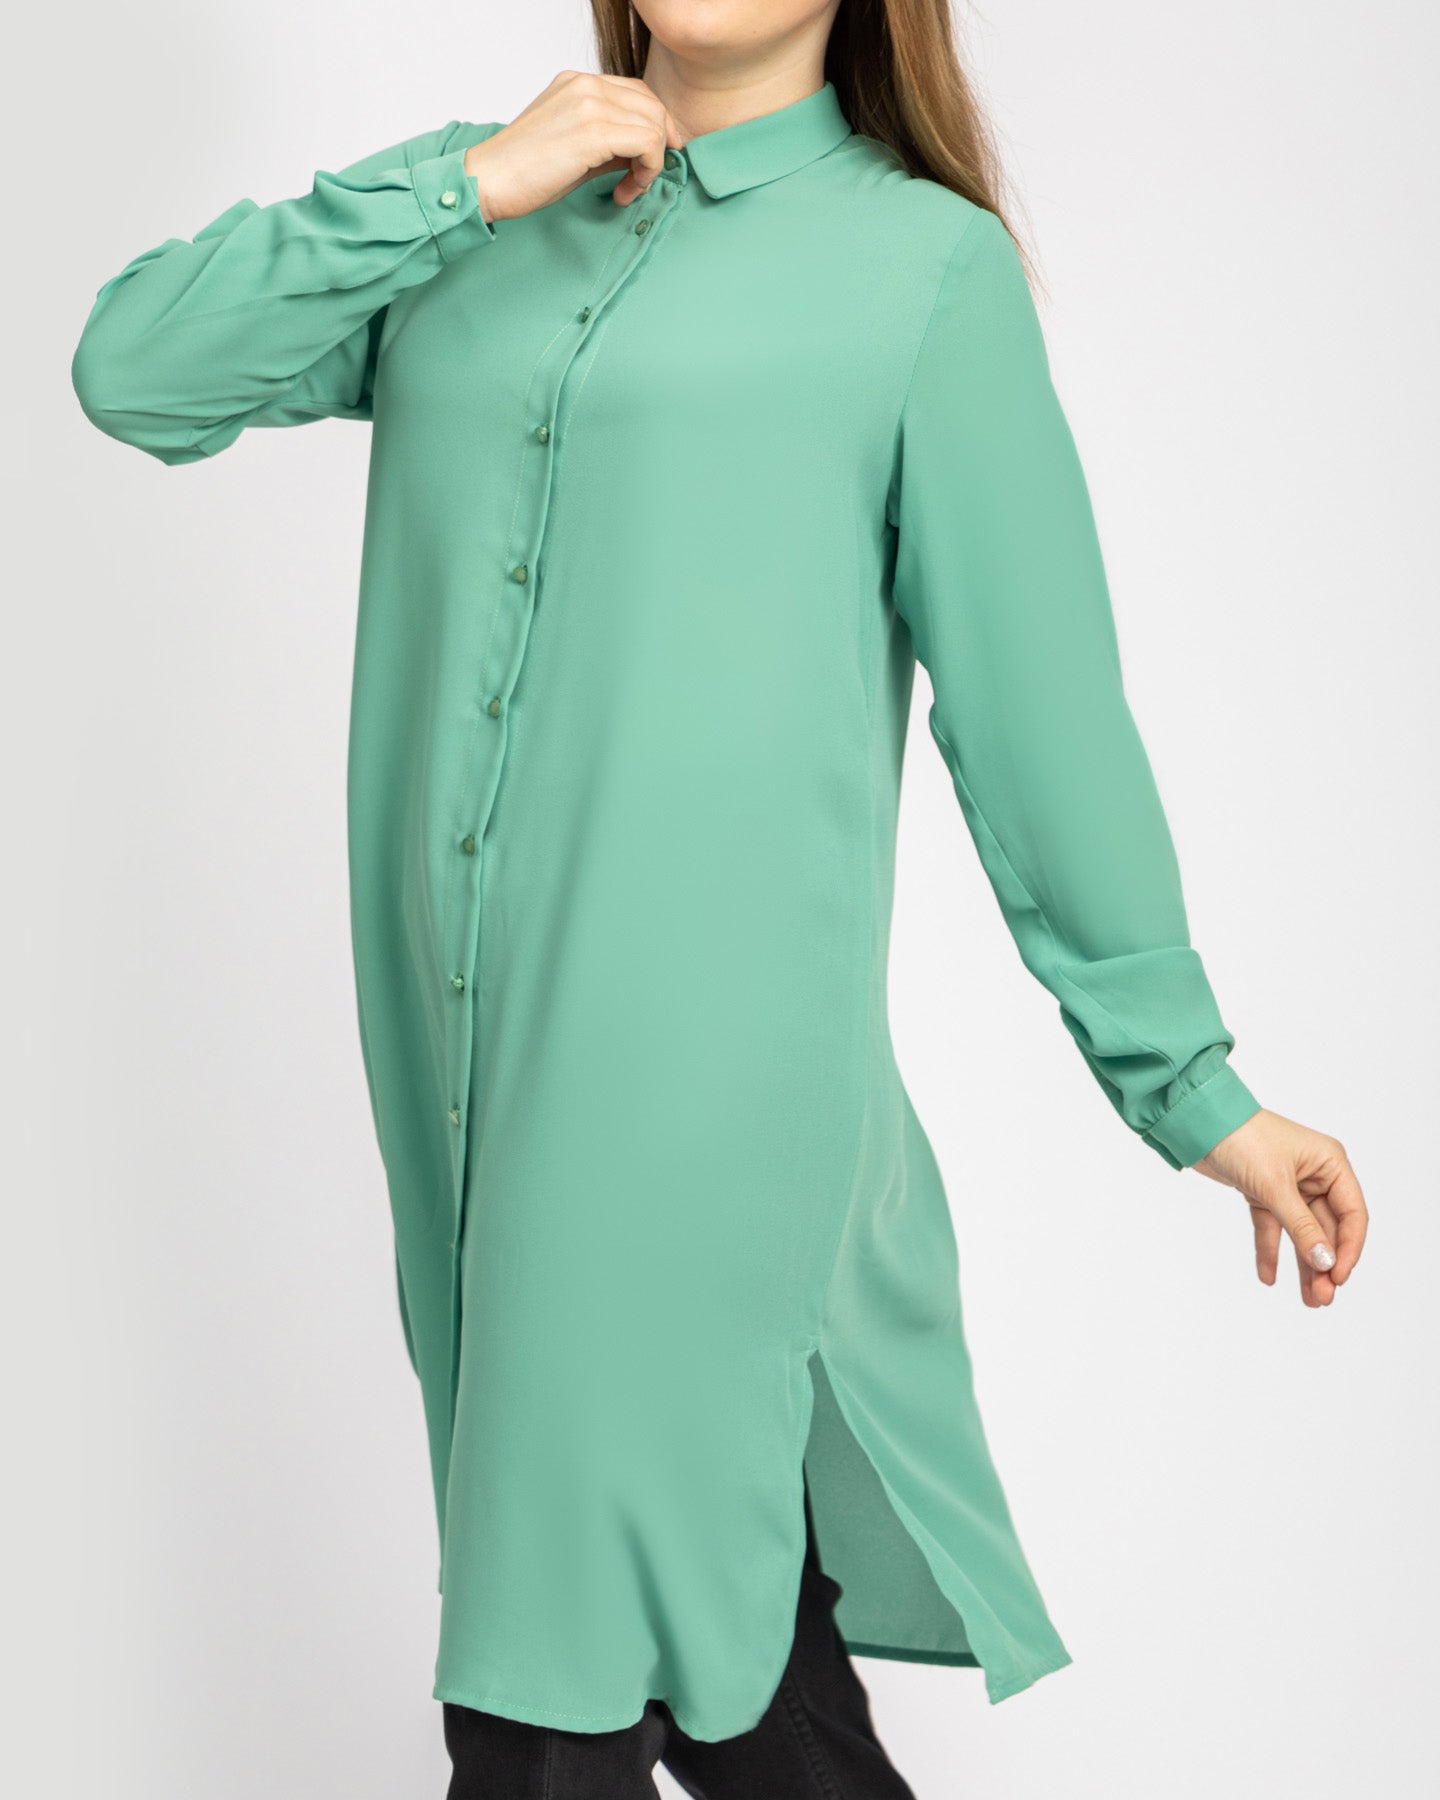 BASIC LONG CREPE CHIFFON SHIRT WITH HIDDEN PLACKET AND SIDE SLITS